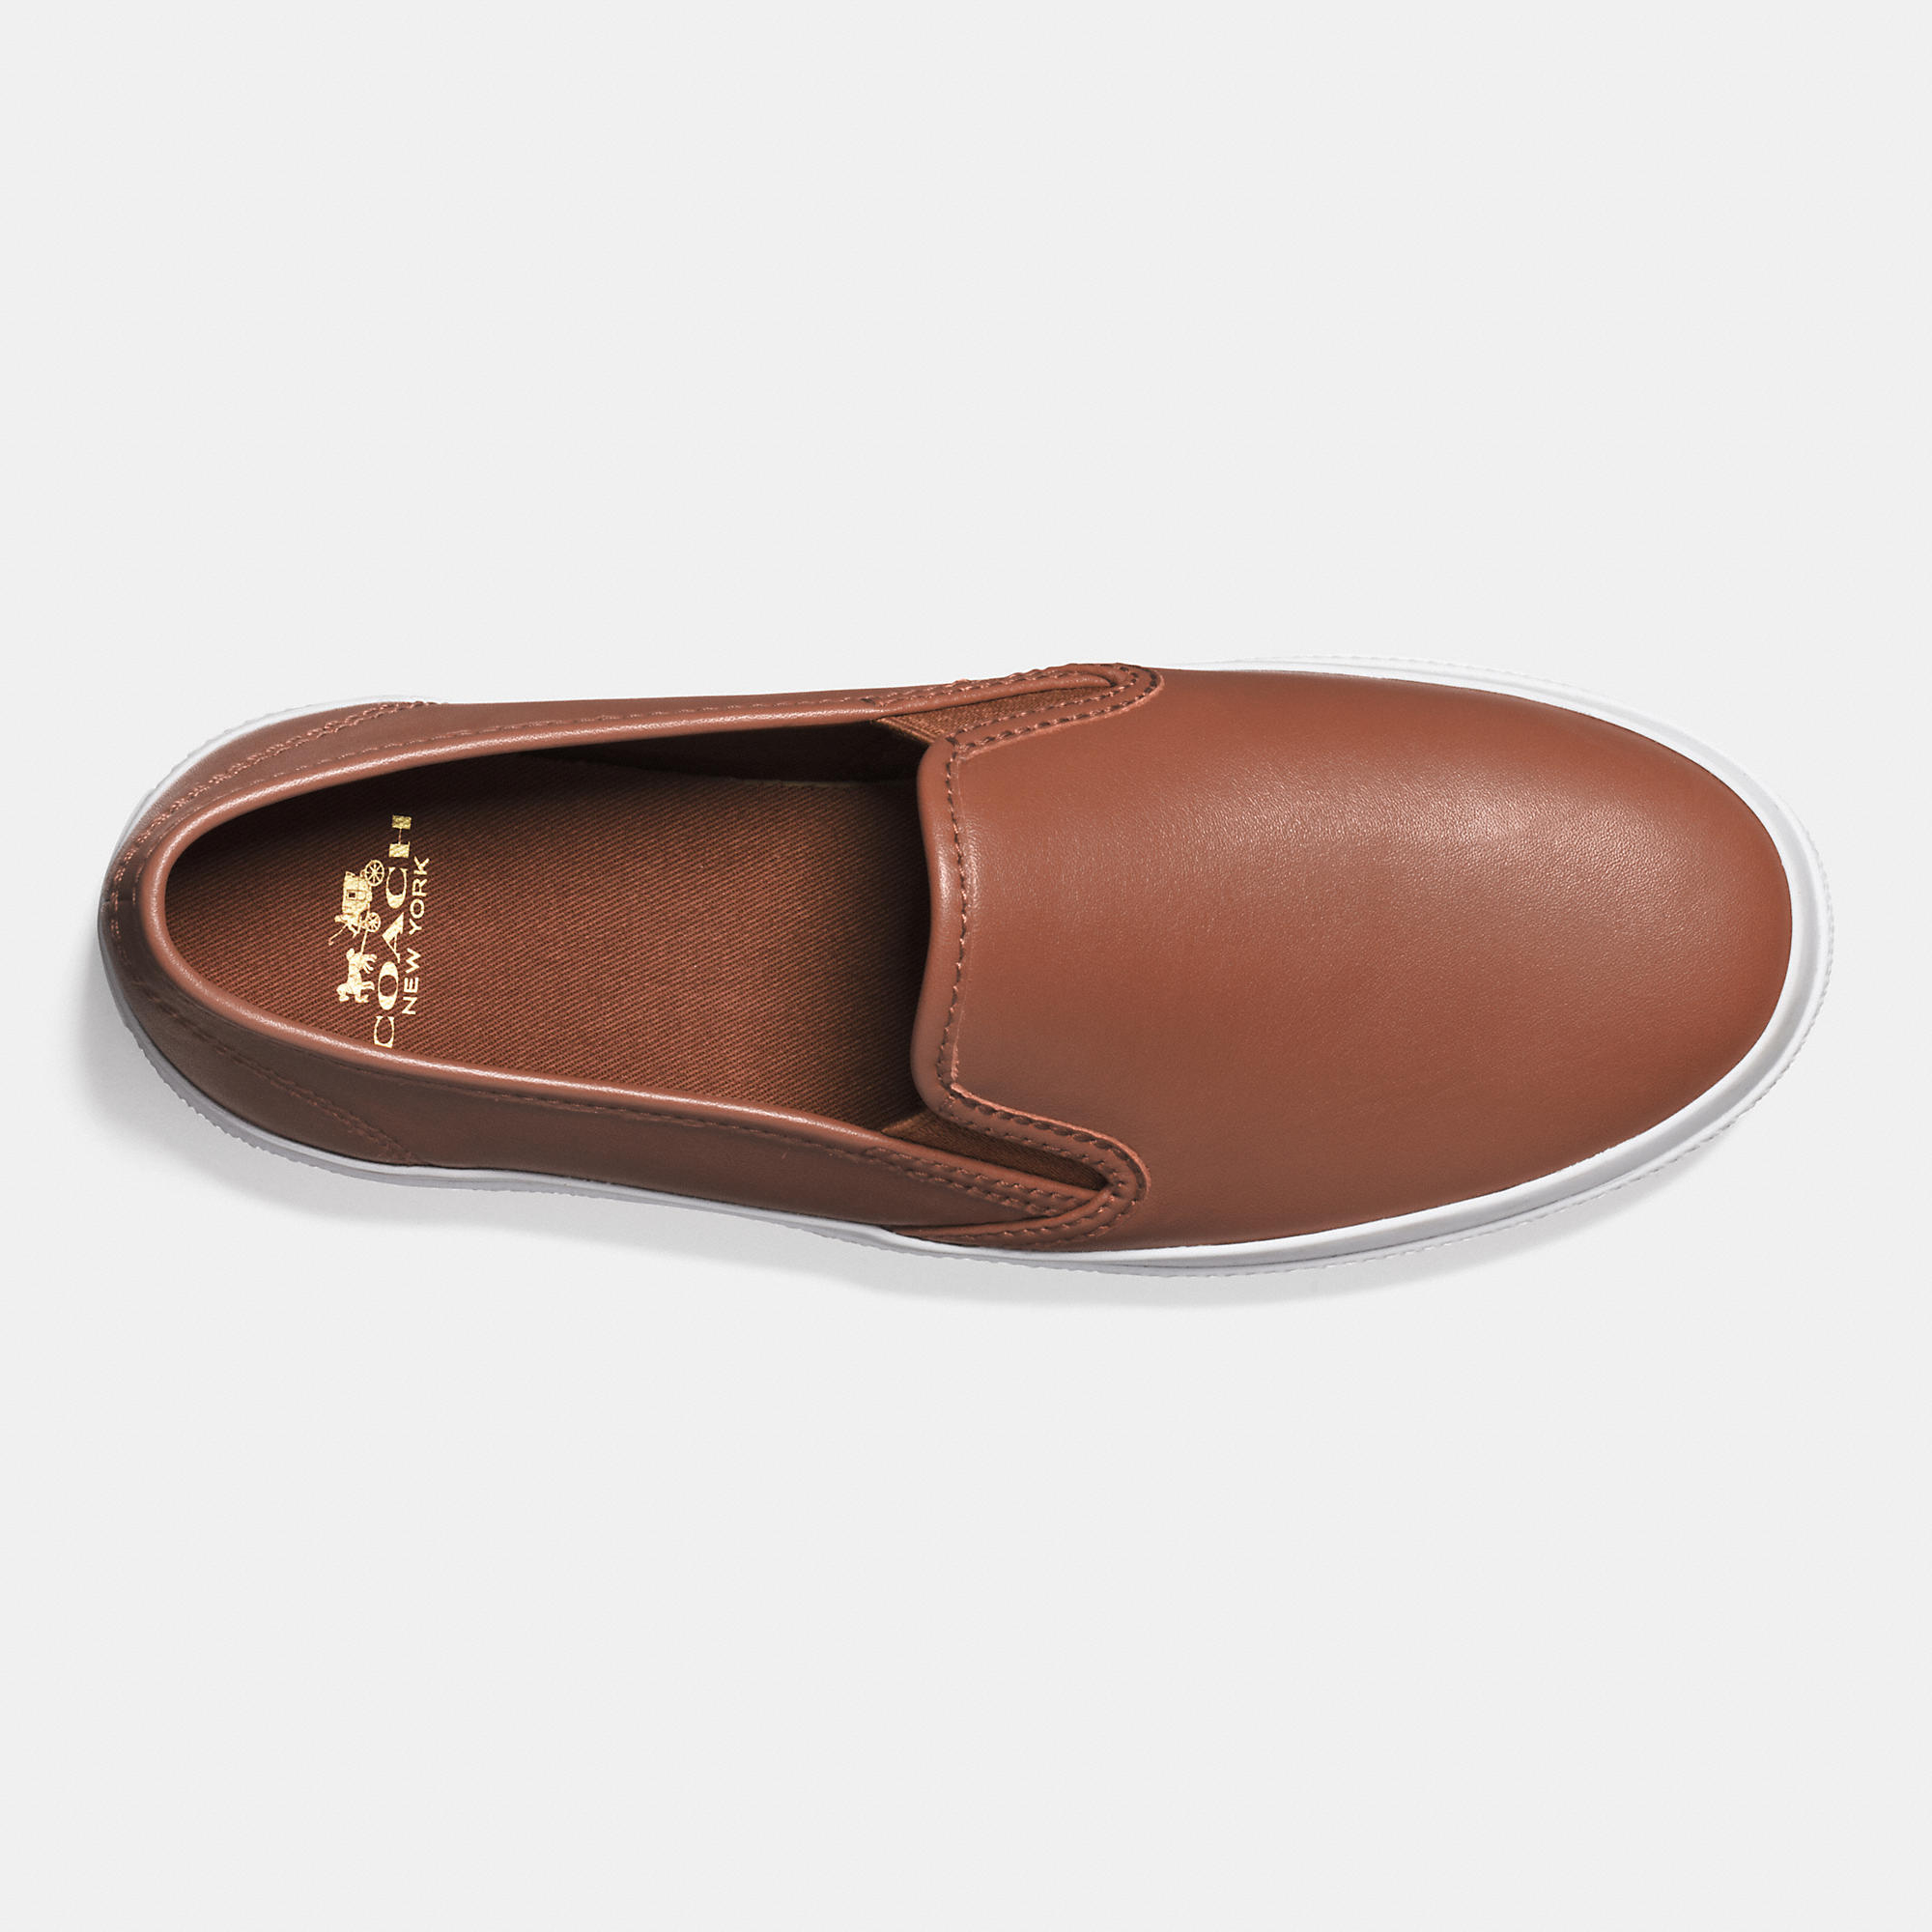 coach chrissy slip on sneakers